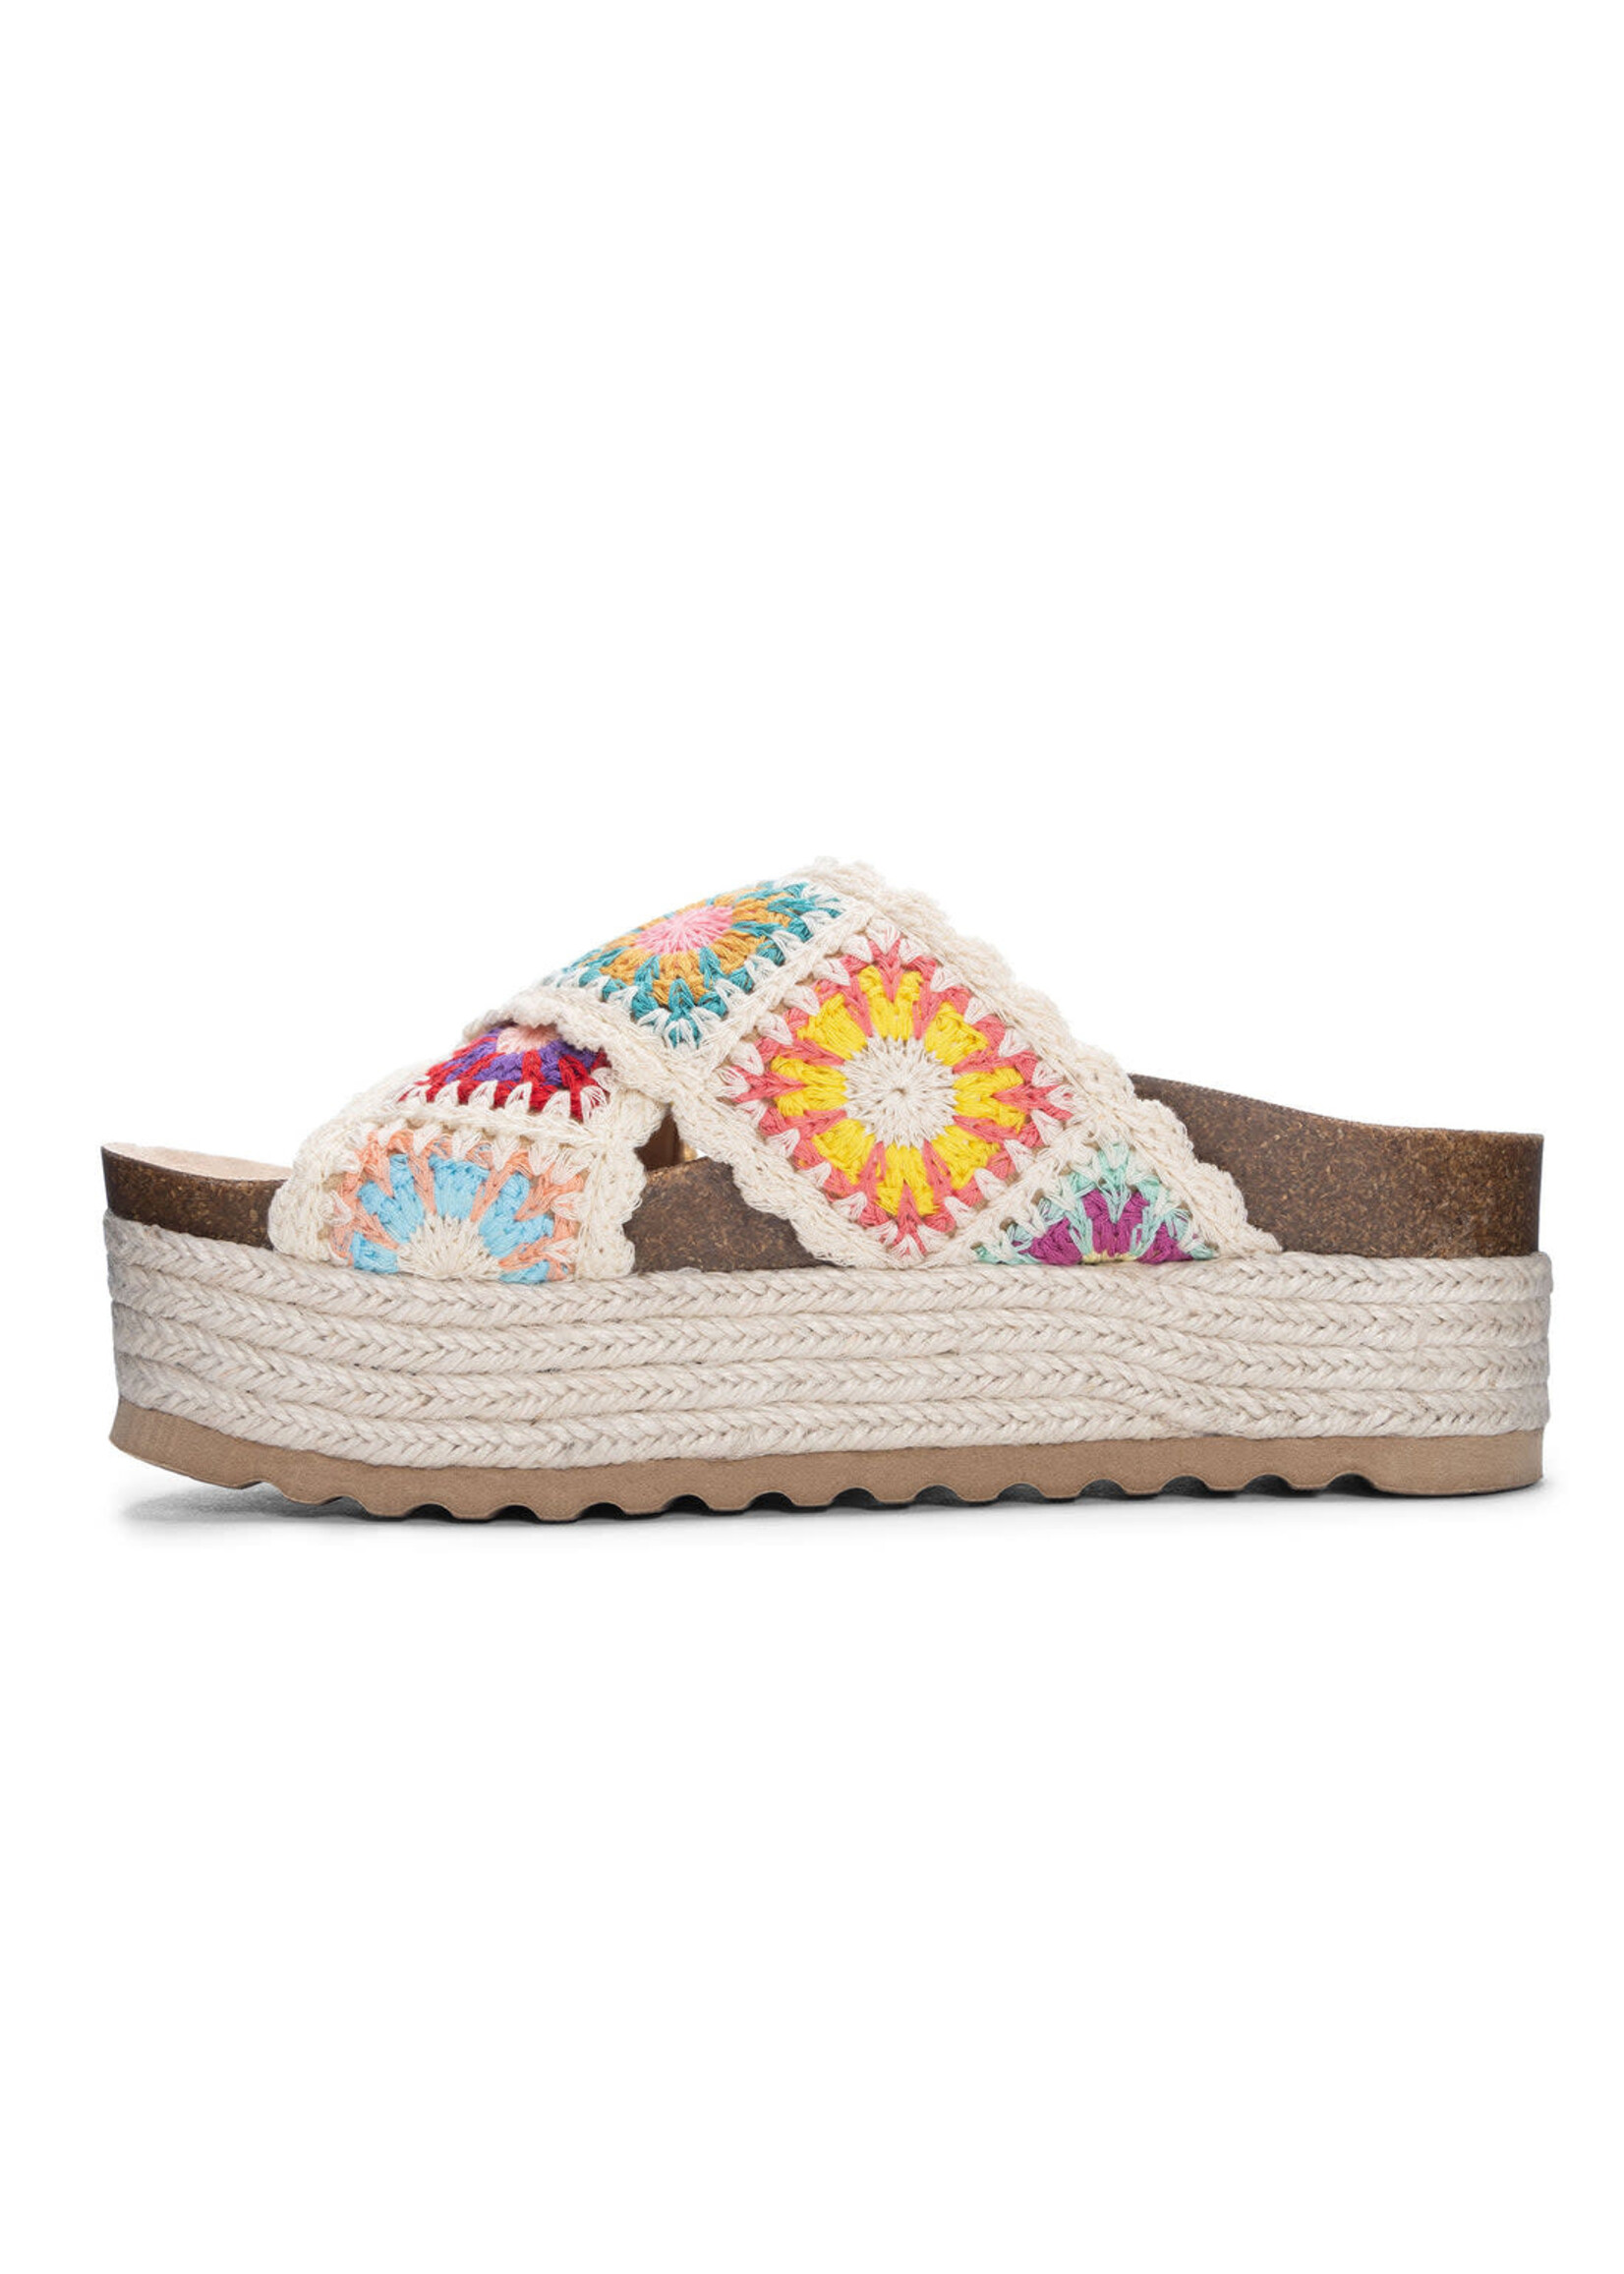 Chinese Laundry Plays in Natural Crochet Slides by Chinese Laundry Final Sale Blowout